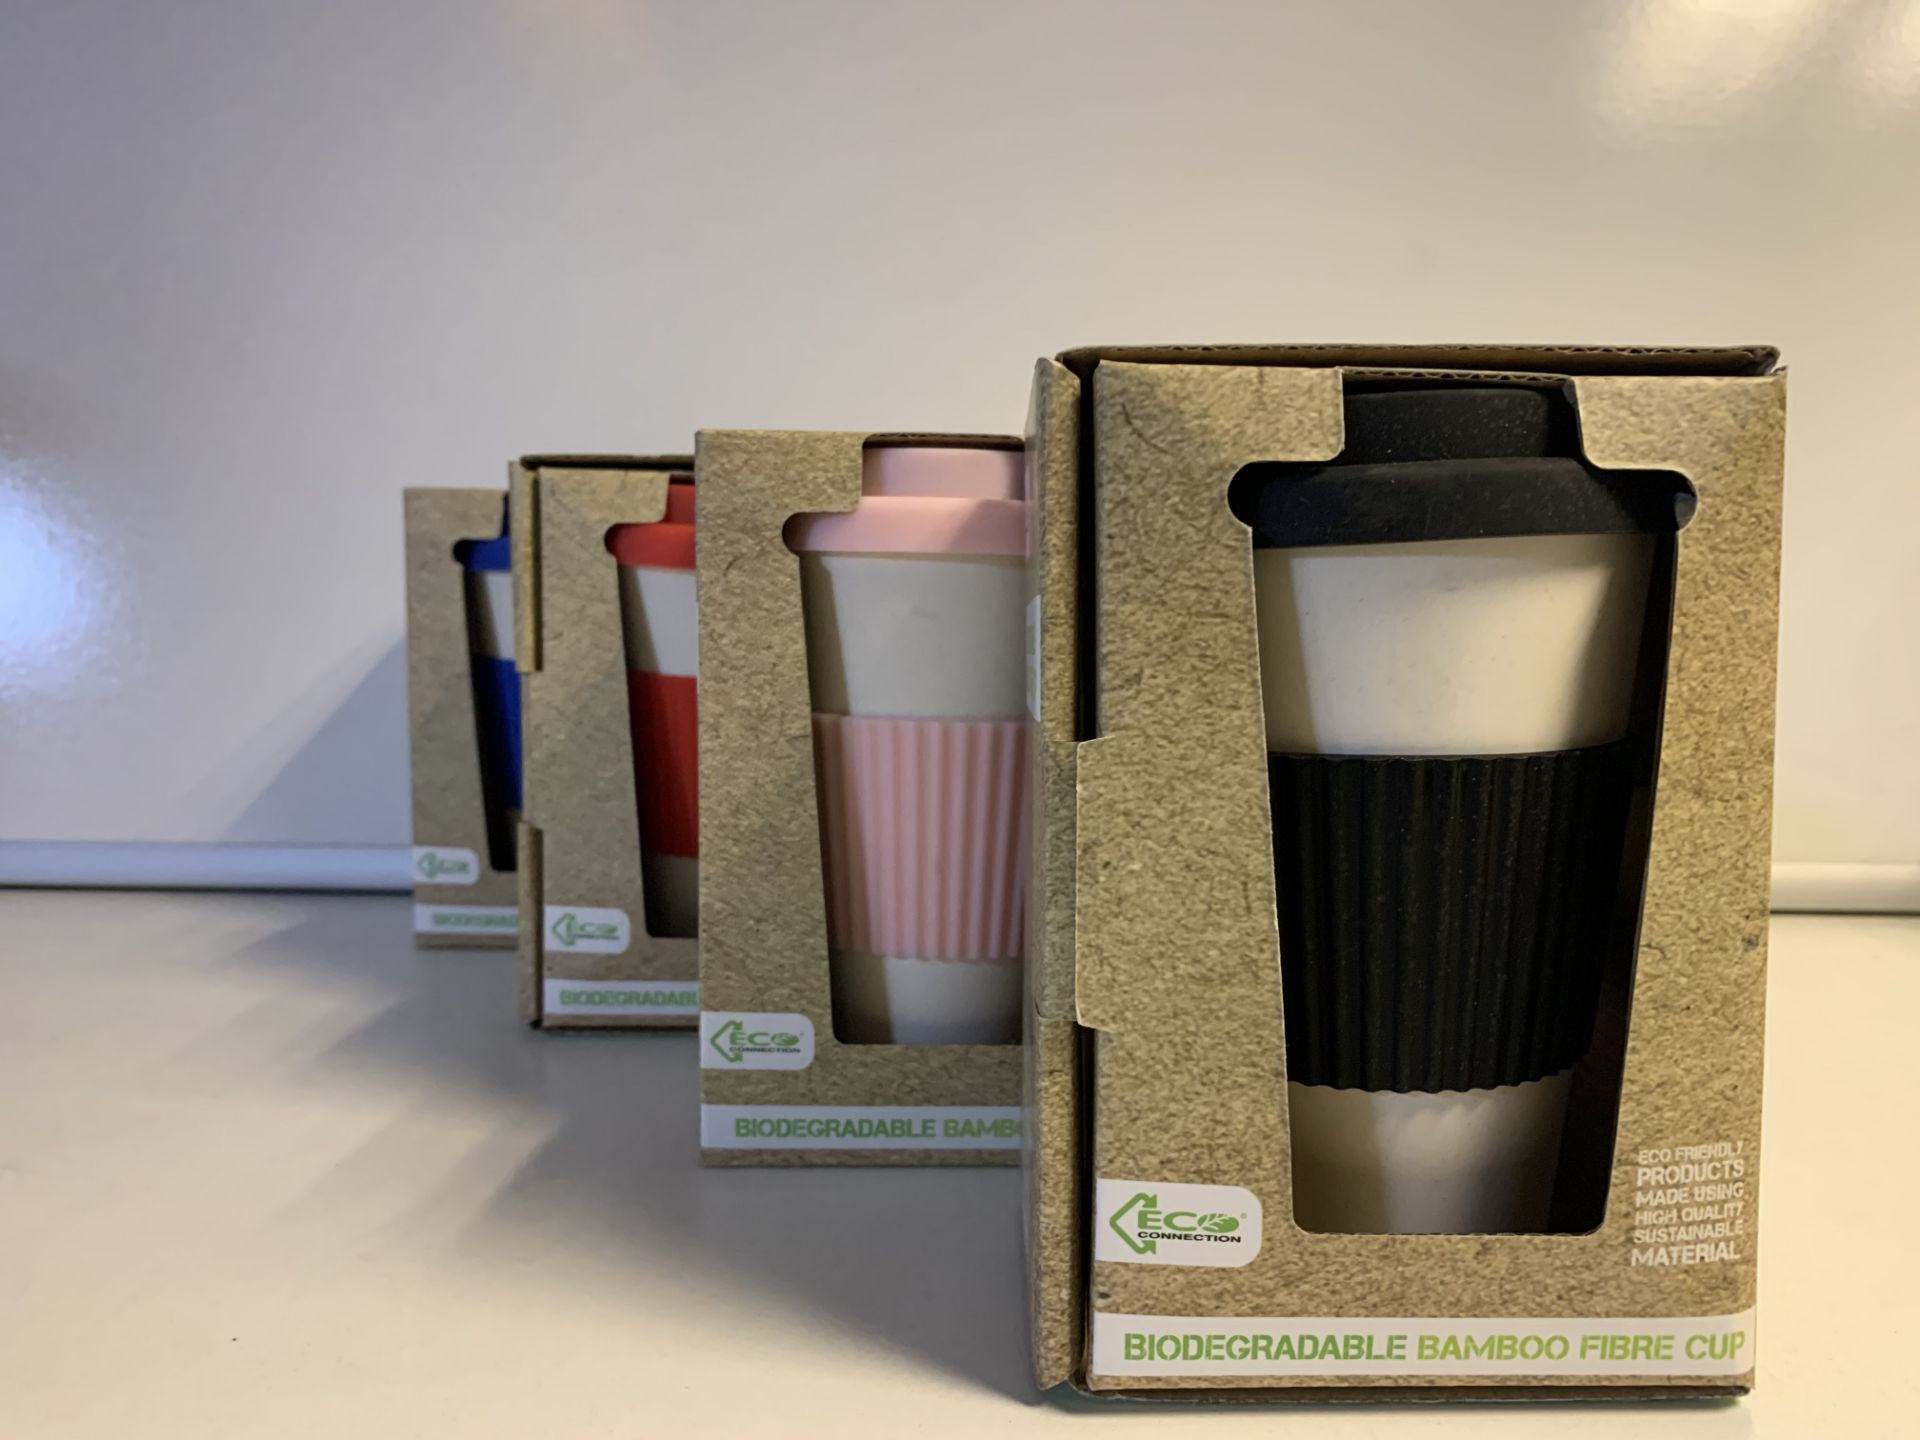 6 x NEW BOXED ECO CONNECTION BIODEGRADABLE BAMBOO FIBRE MUGS